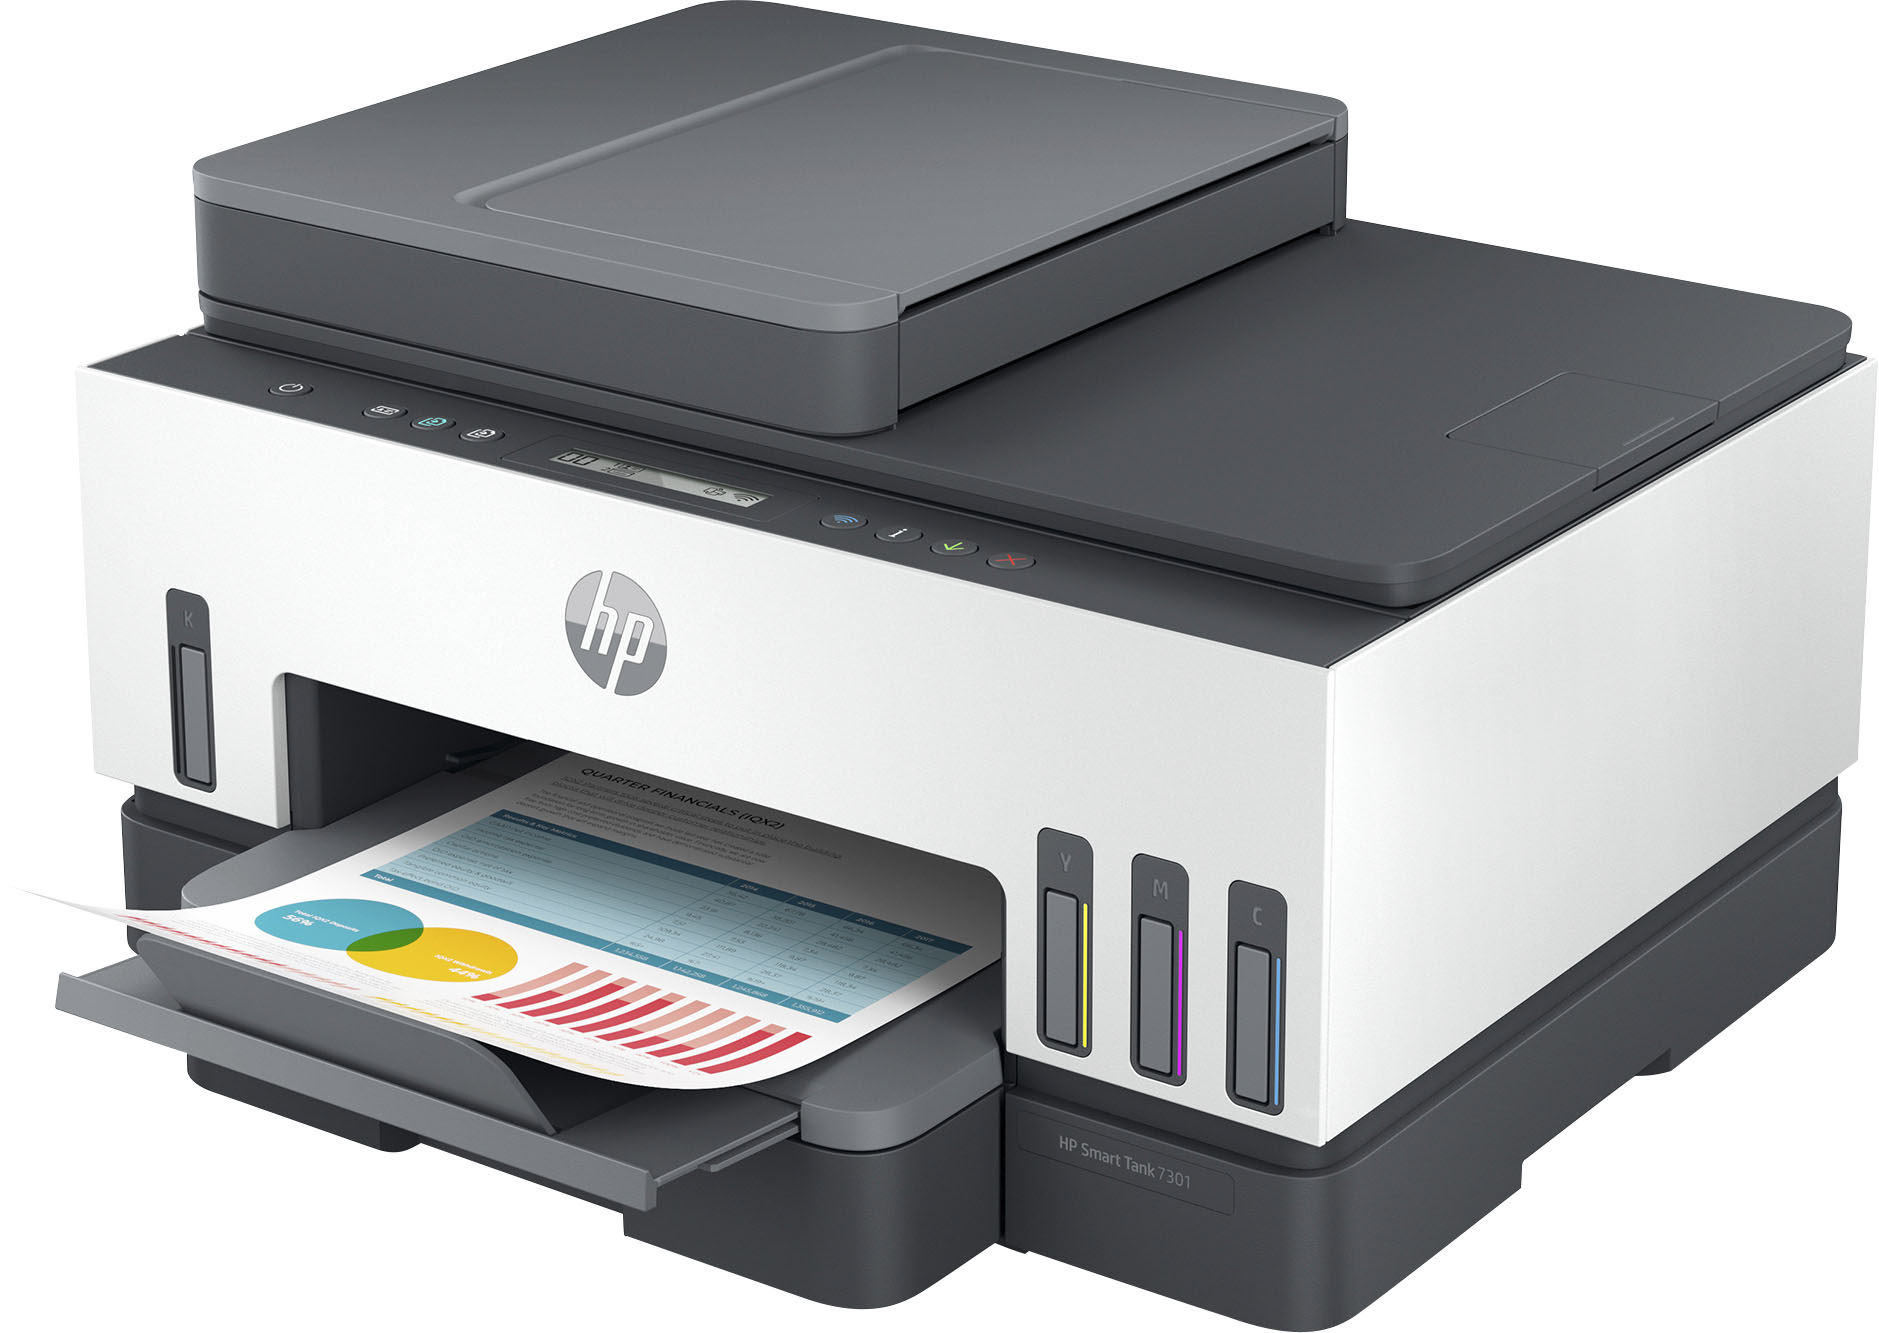 HP Smart Tank Printers launched in India for small businesses, homes